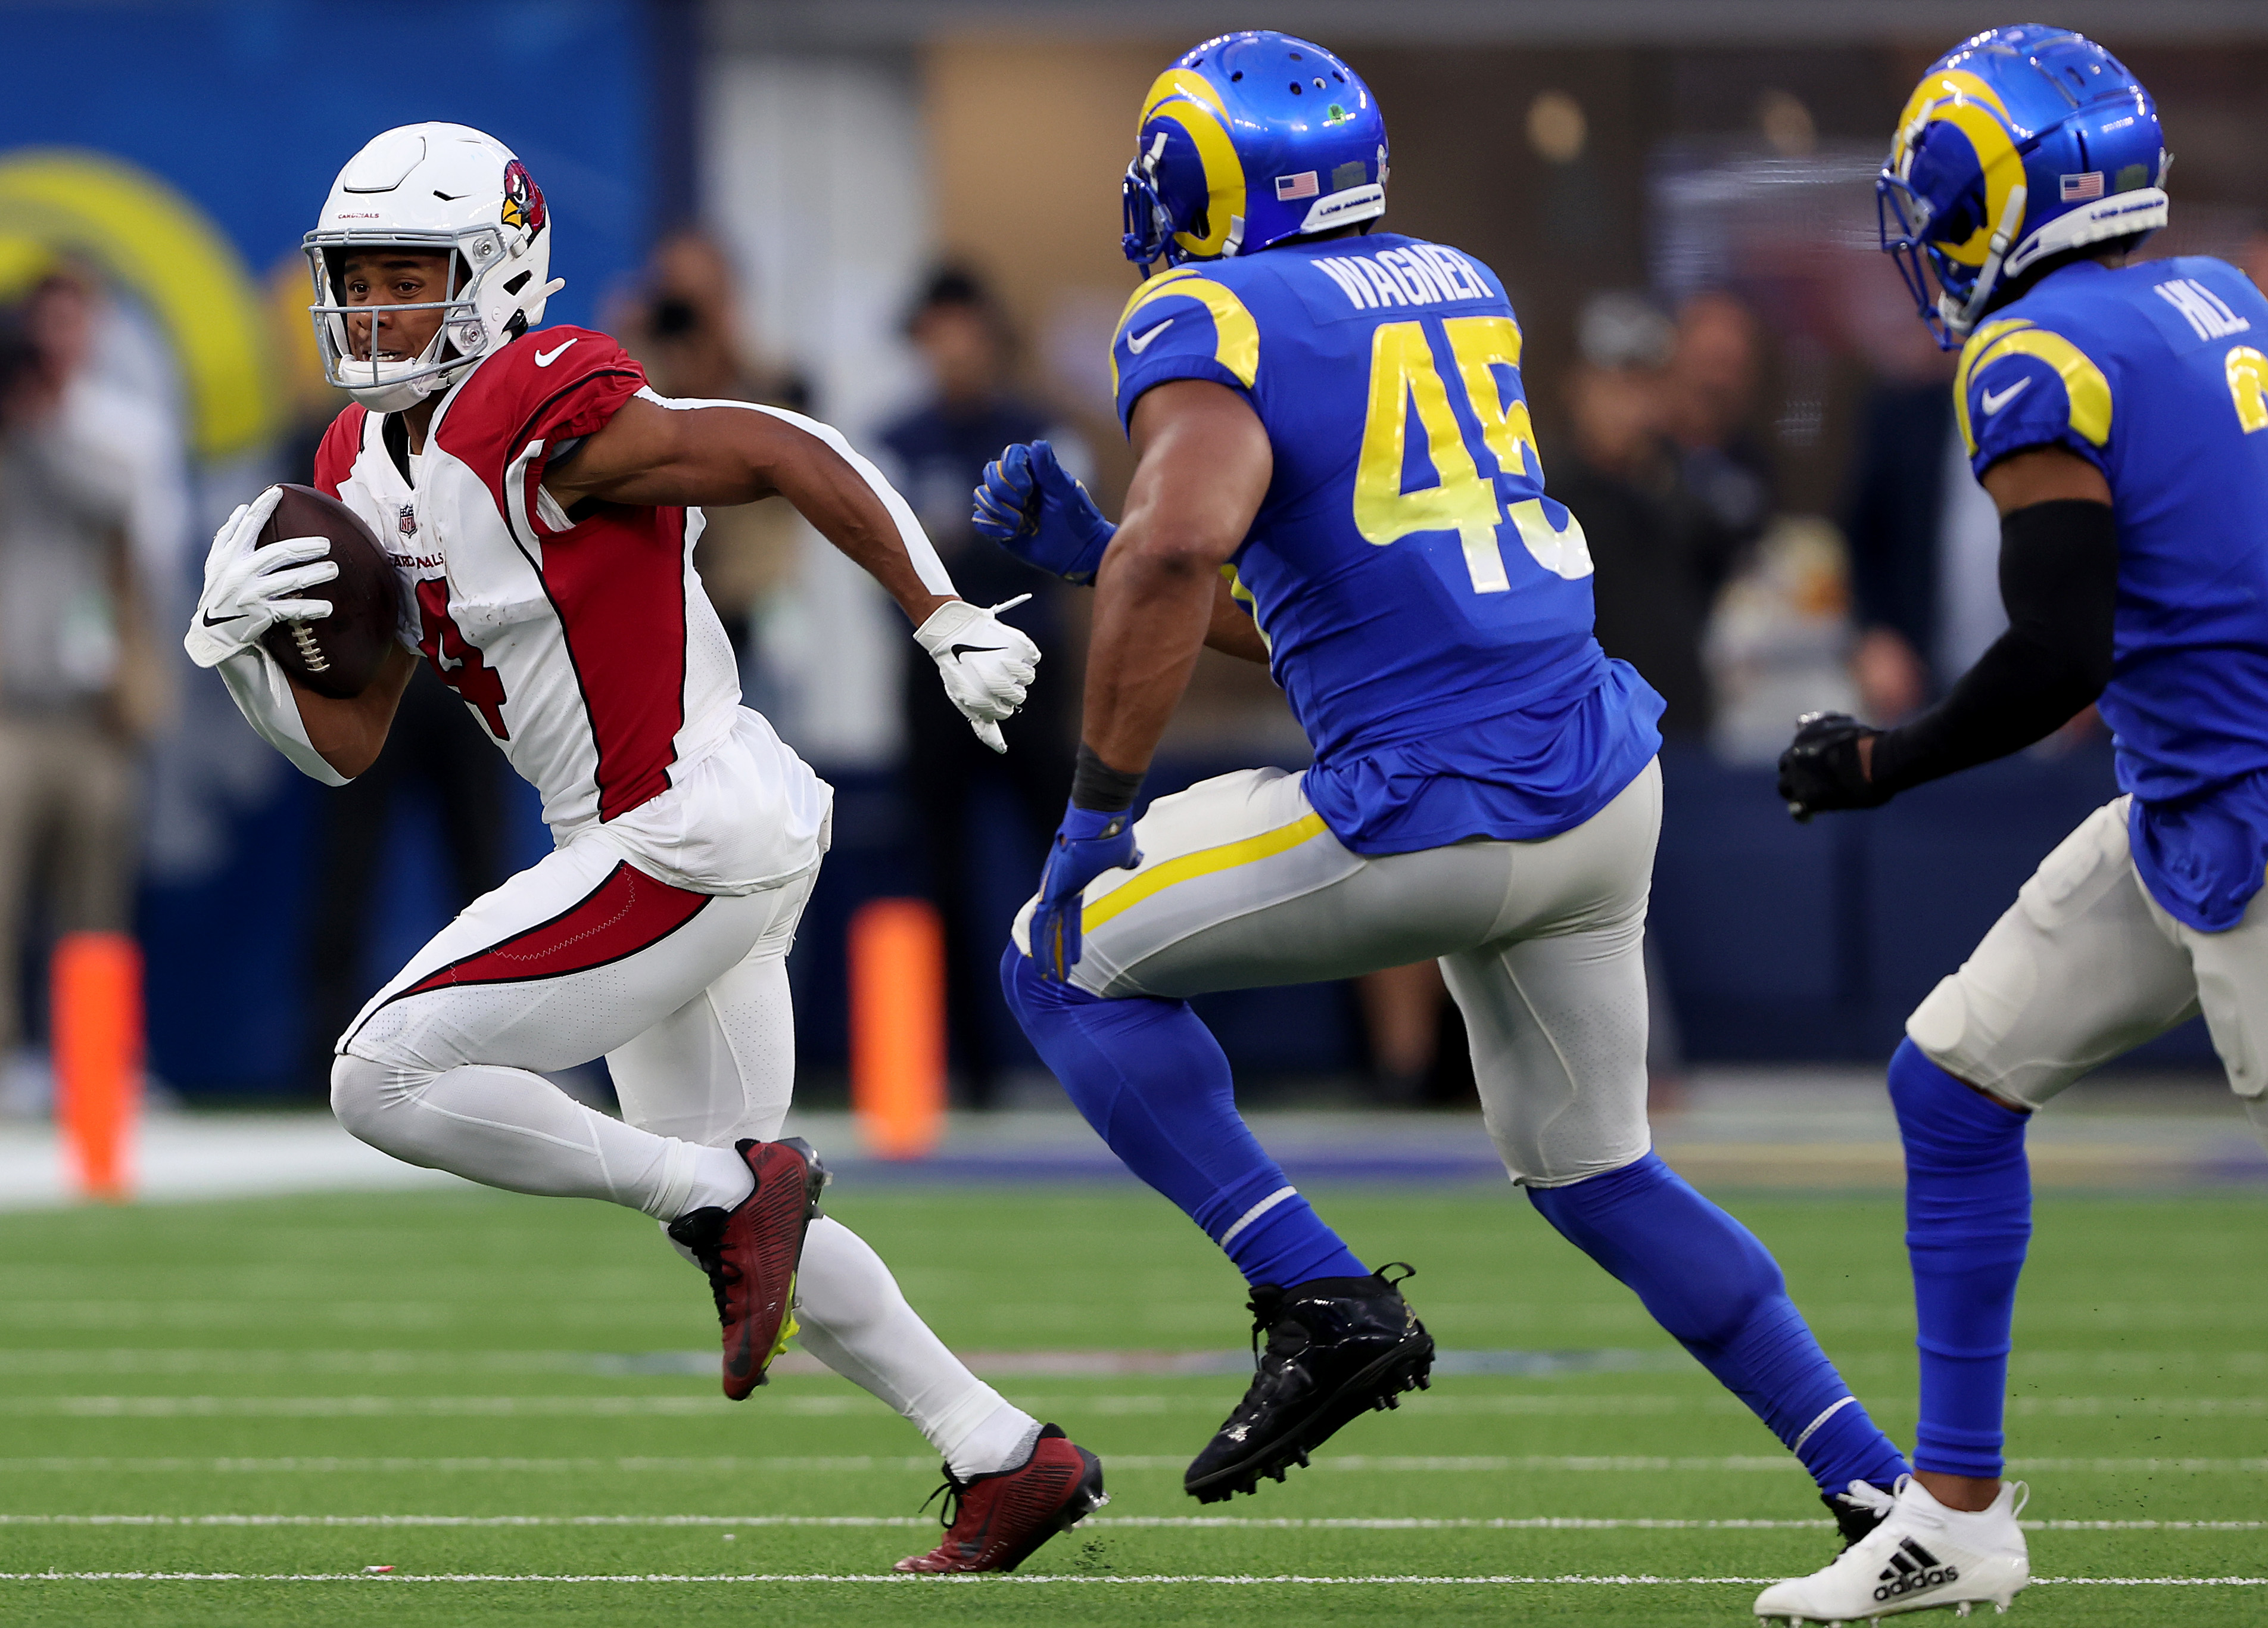 Rondale Moore #4 of the Arizona Cardinals rushes the ball during a game against the Los Angeles Rams at SoFi Stadium on November 13, 2022 in Inglewood, California.